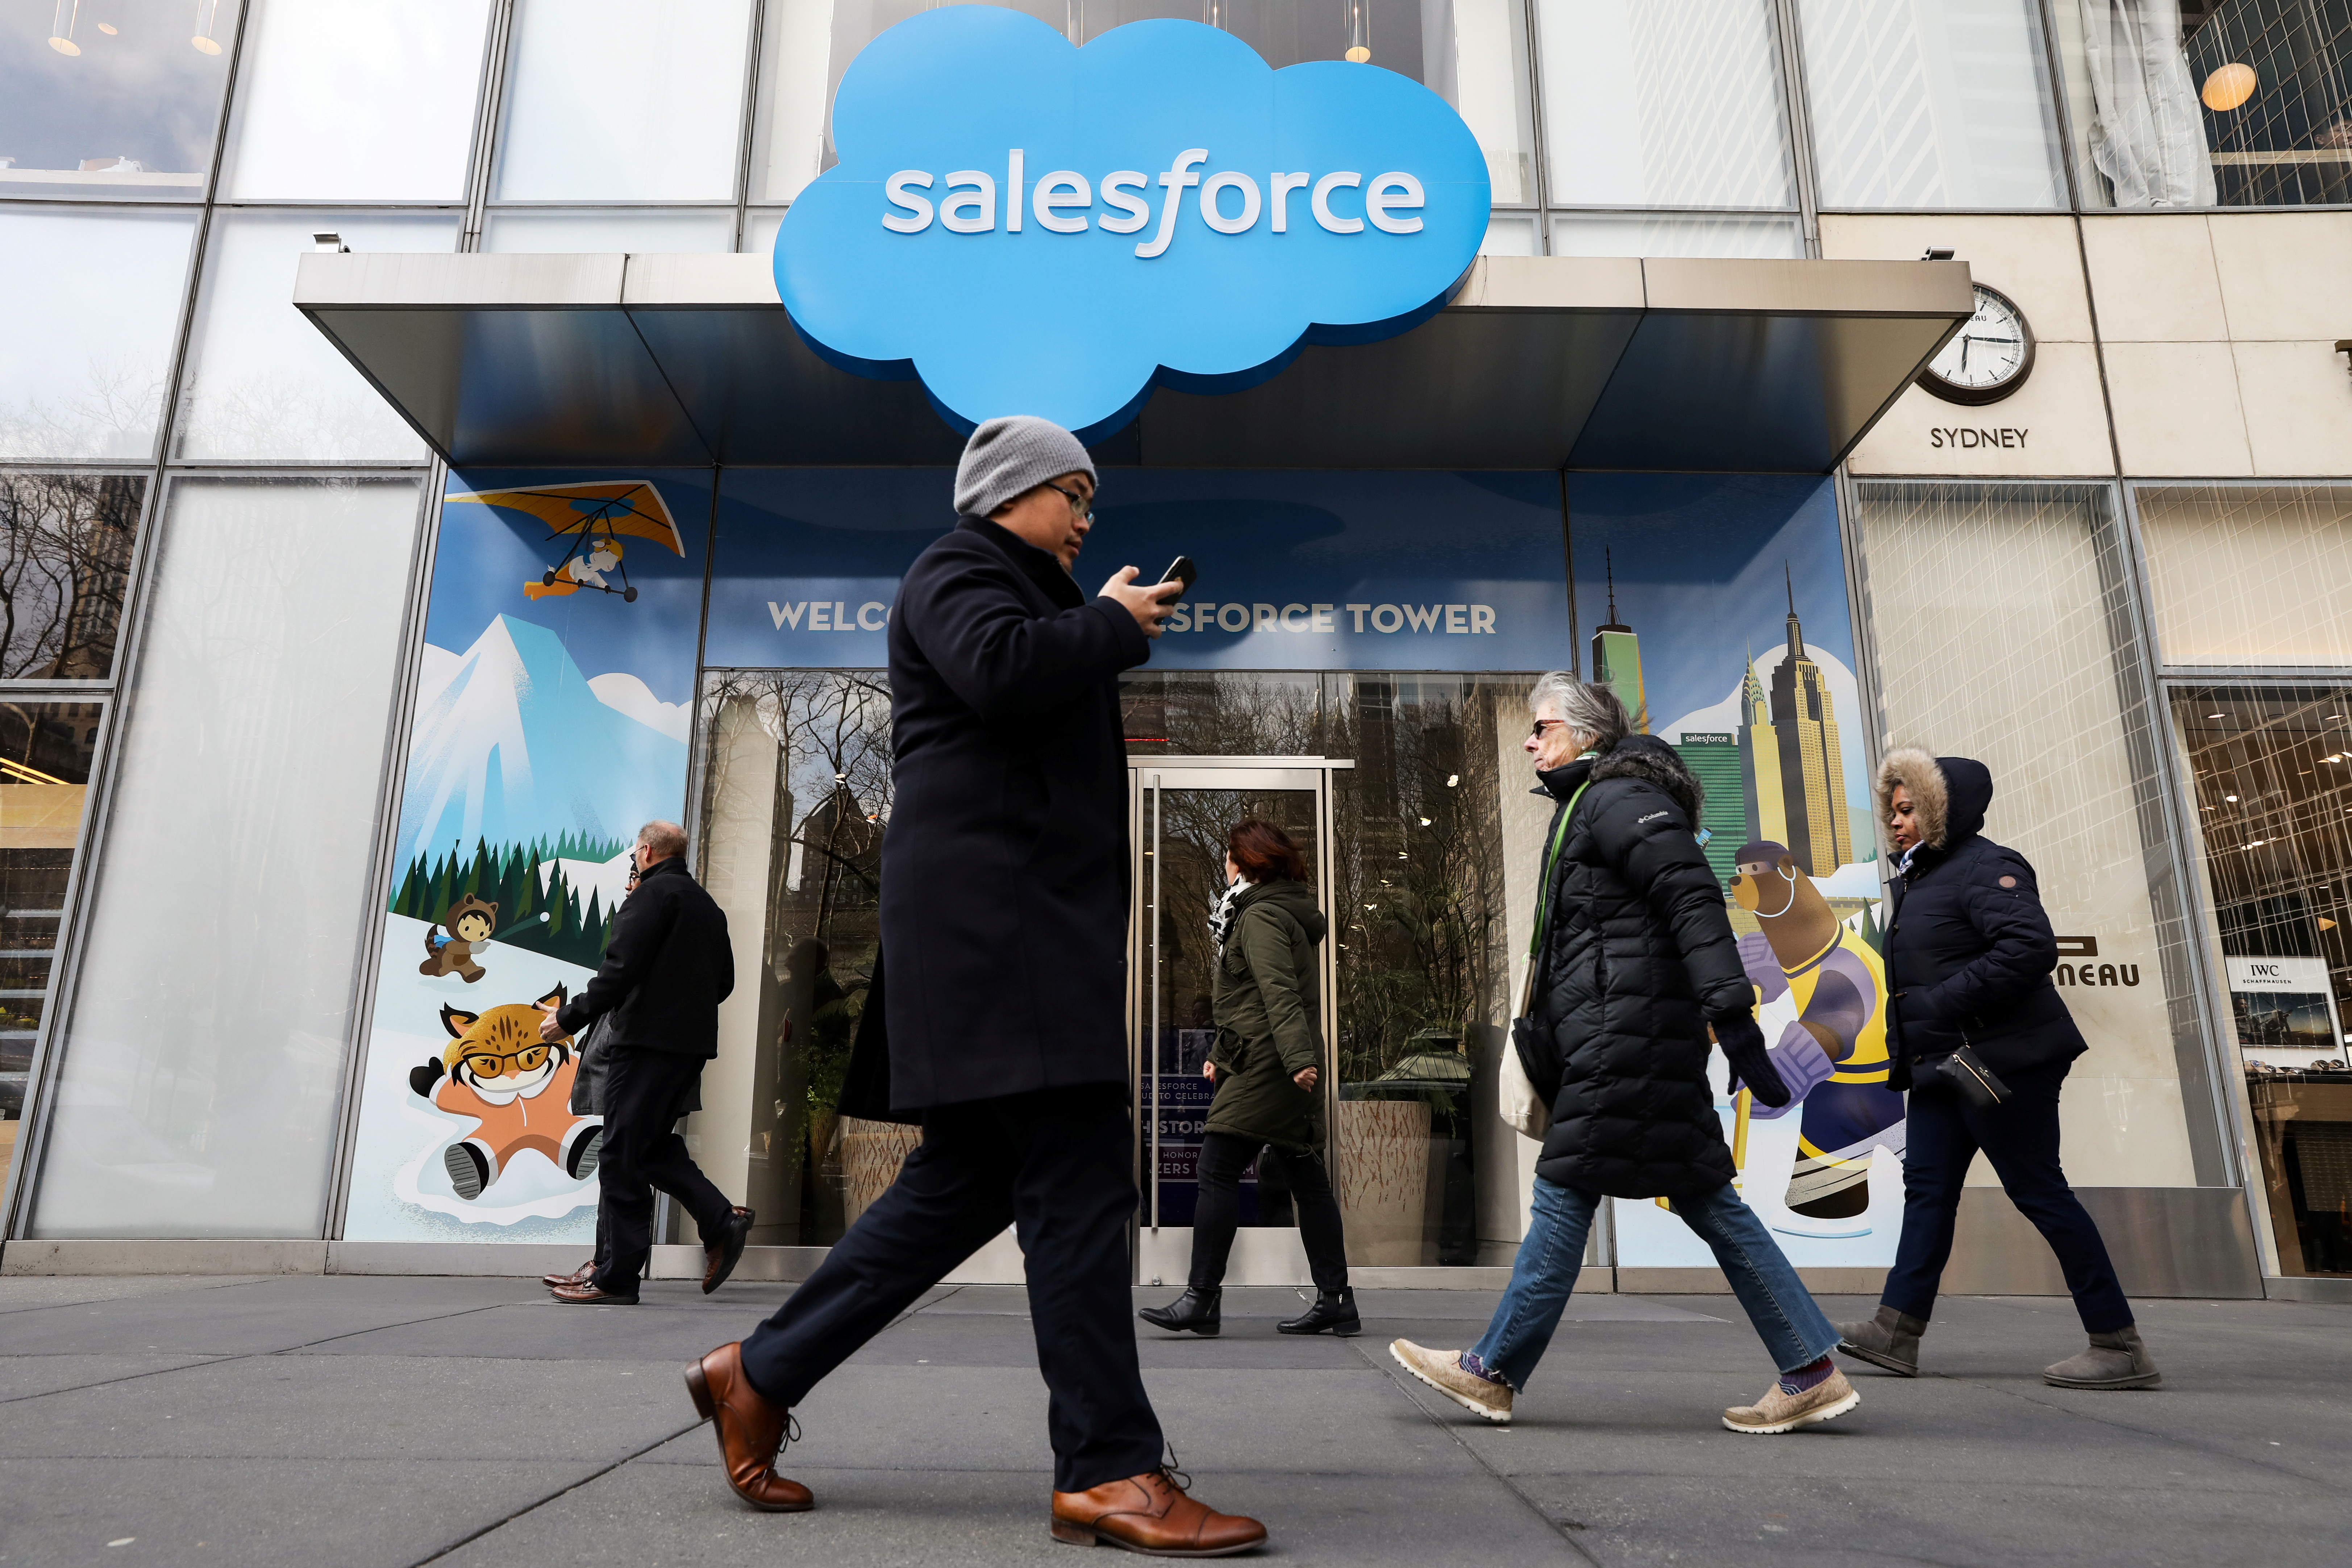 People pass by the Salesforce Tower and Salesforce.com offices in New York